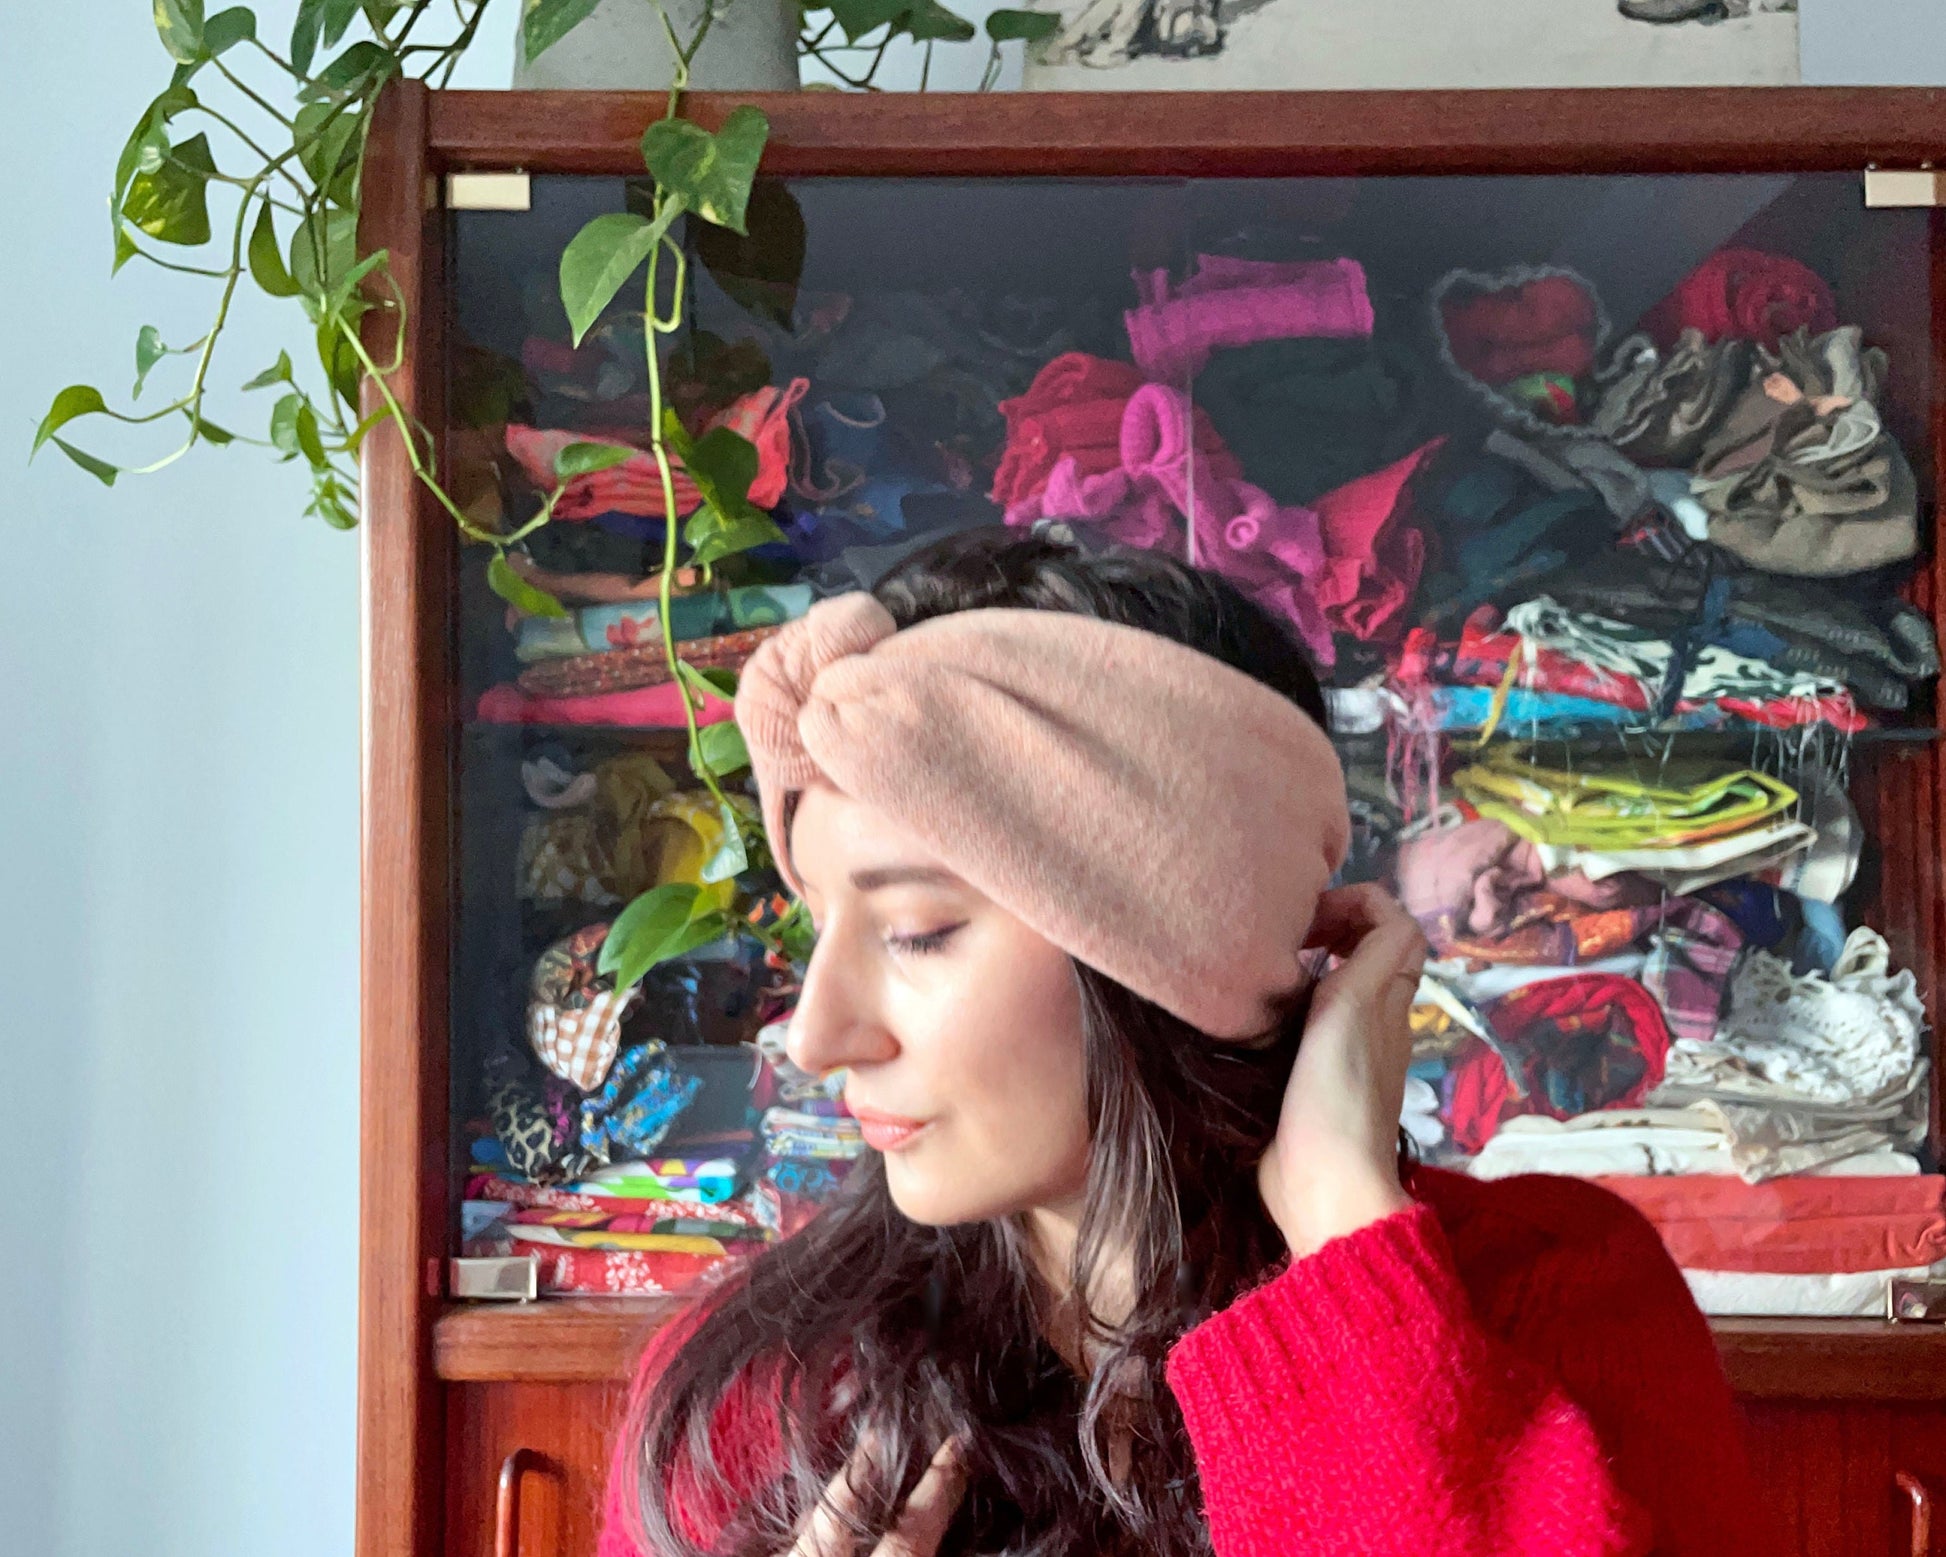 Blush Recycled Cashmere & Wool Headband - from Recycled materials